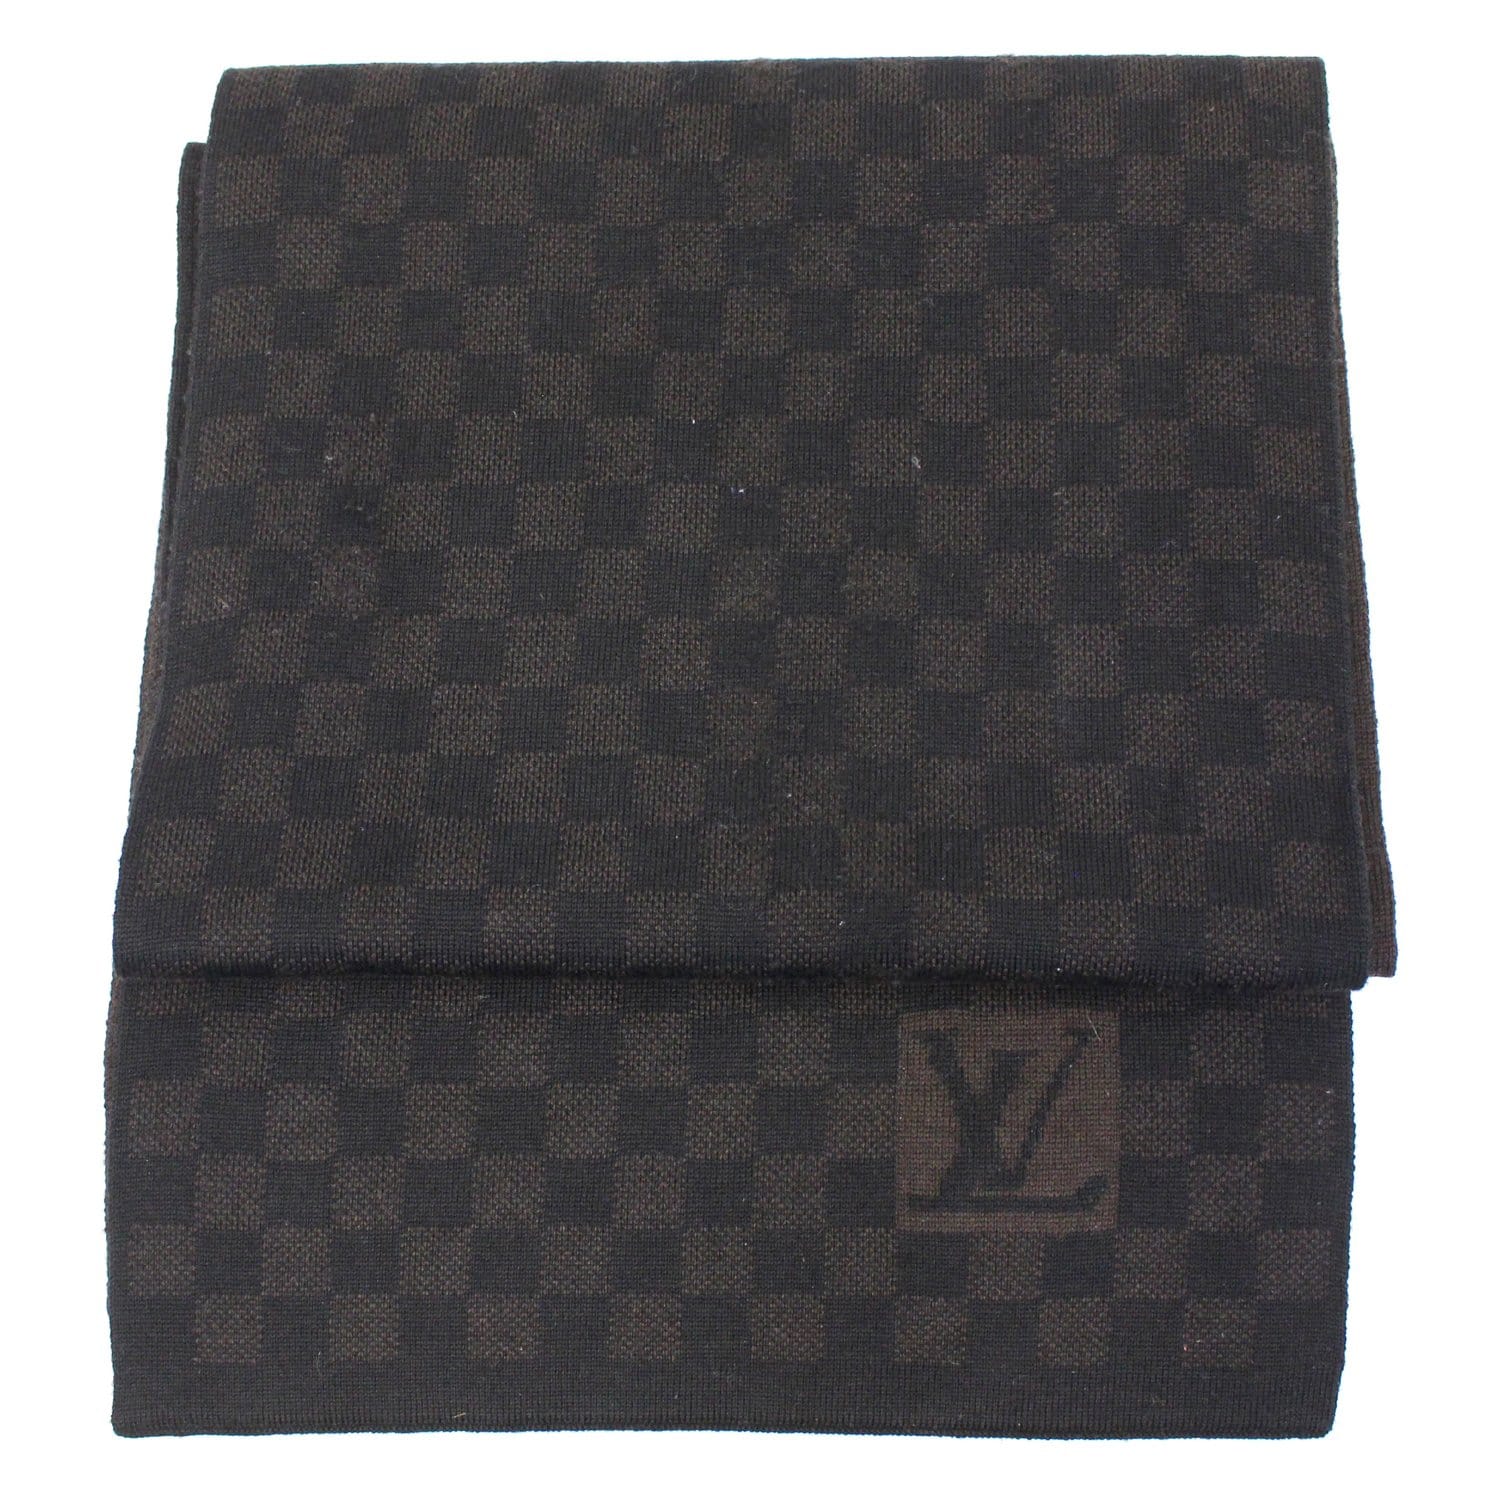 damier scarf and